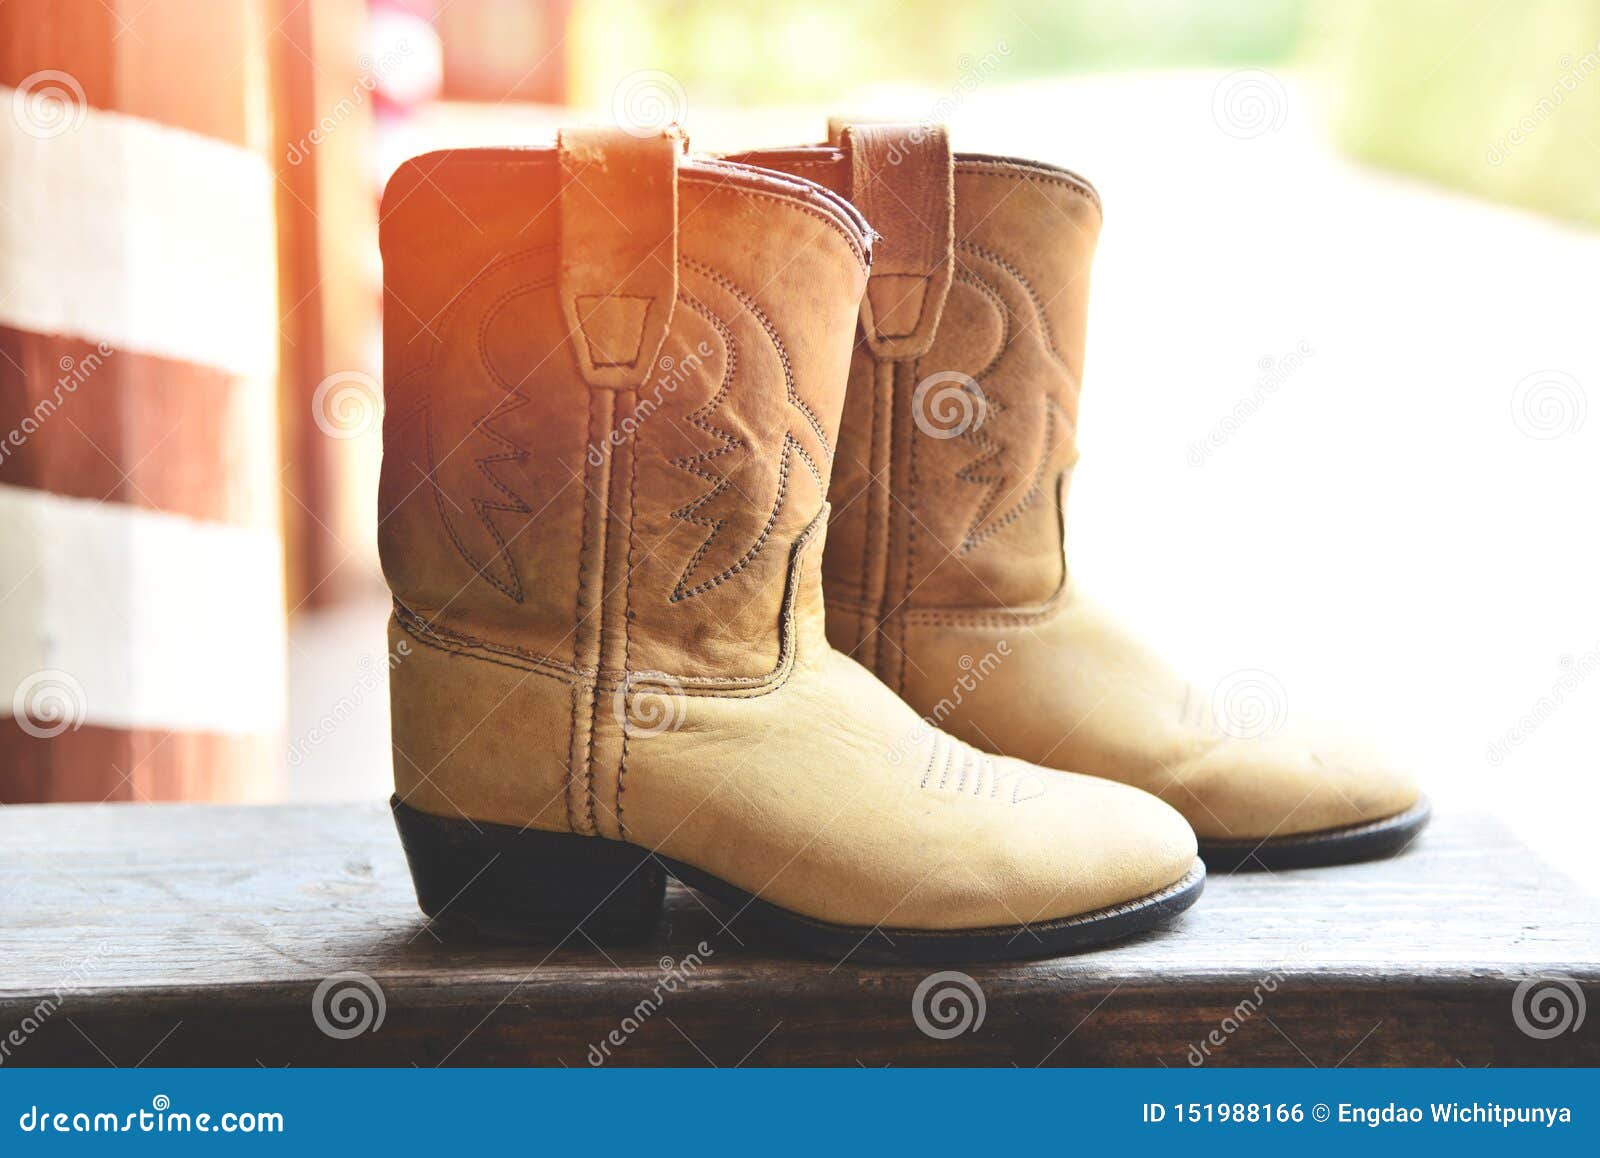 Cowboy Boots - American Wild West Retro Cowboy Rodeo Pair of ...